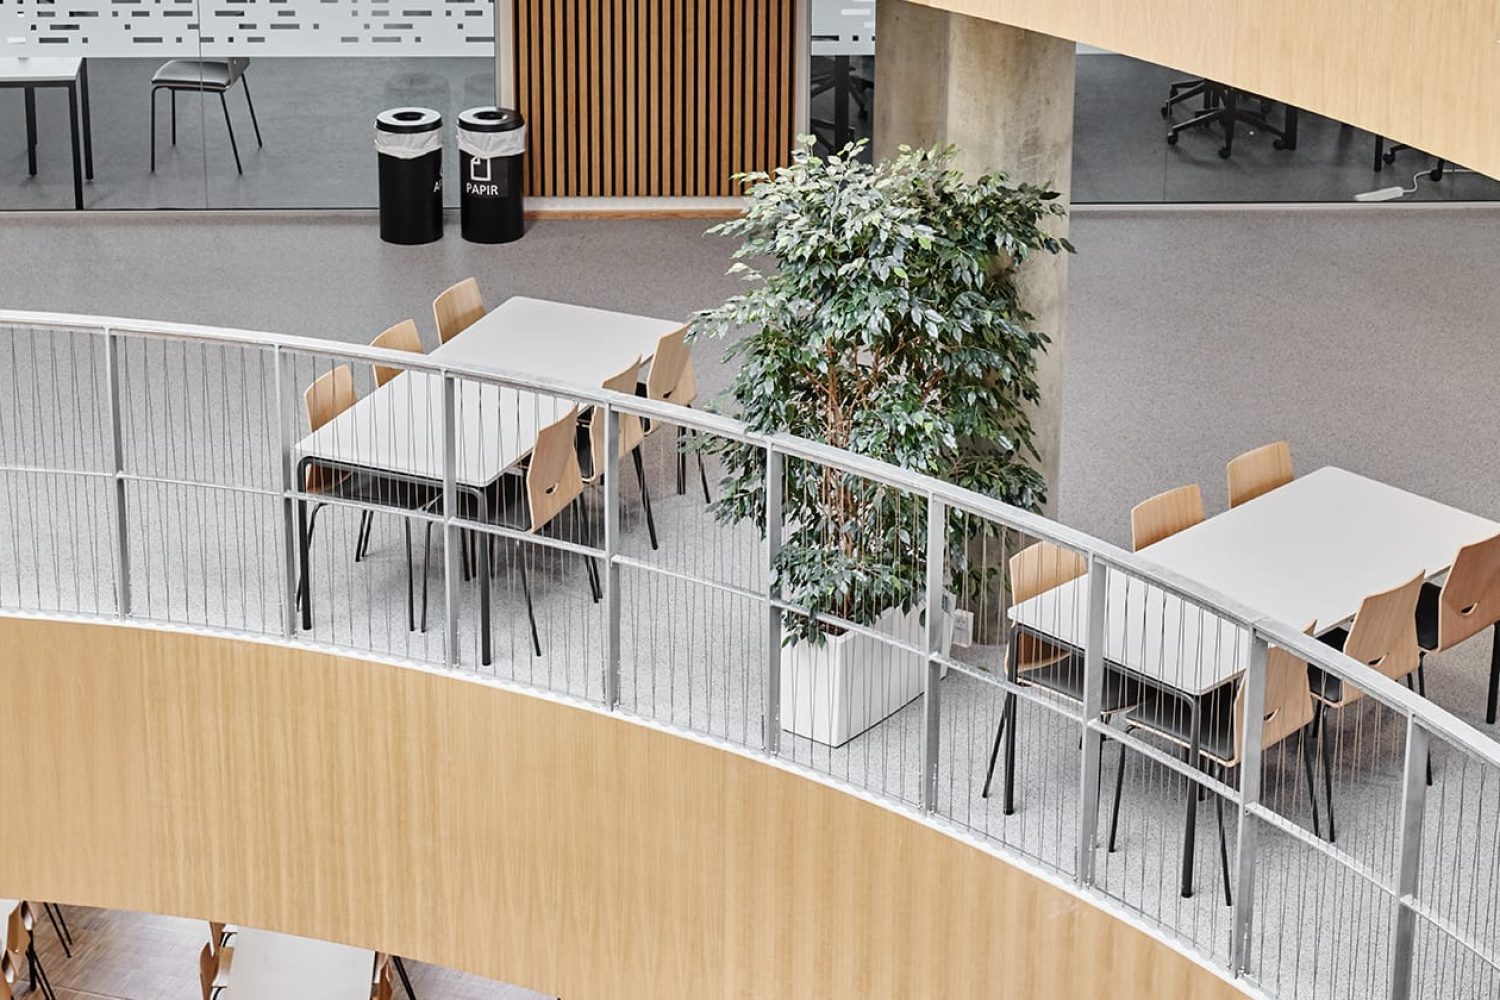 A spiral staircase with office tables and office desk chairs in an office building.